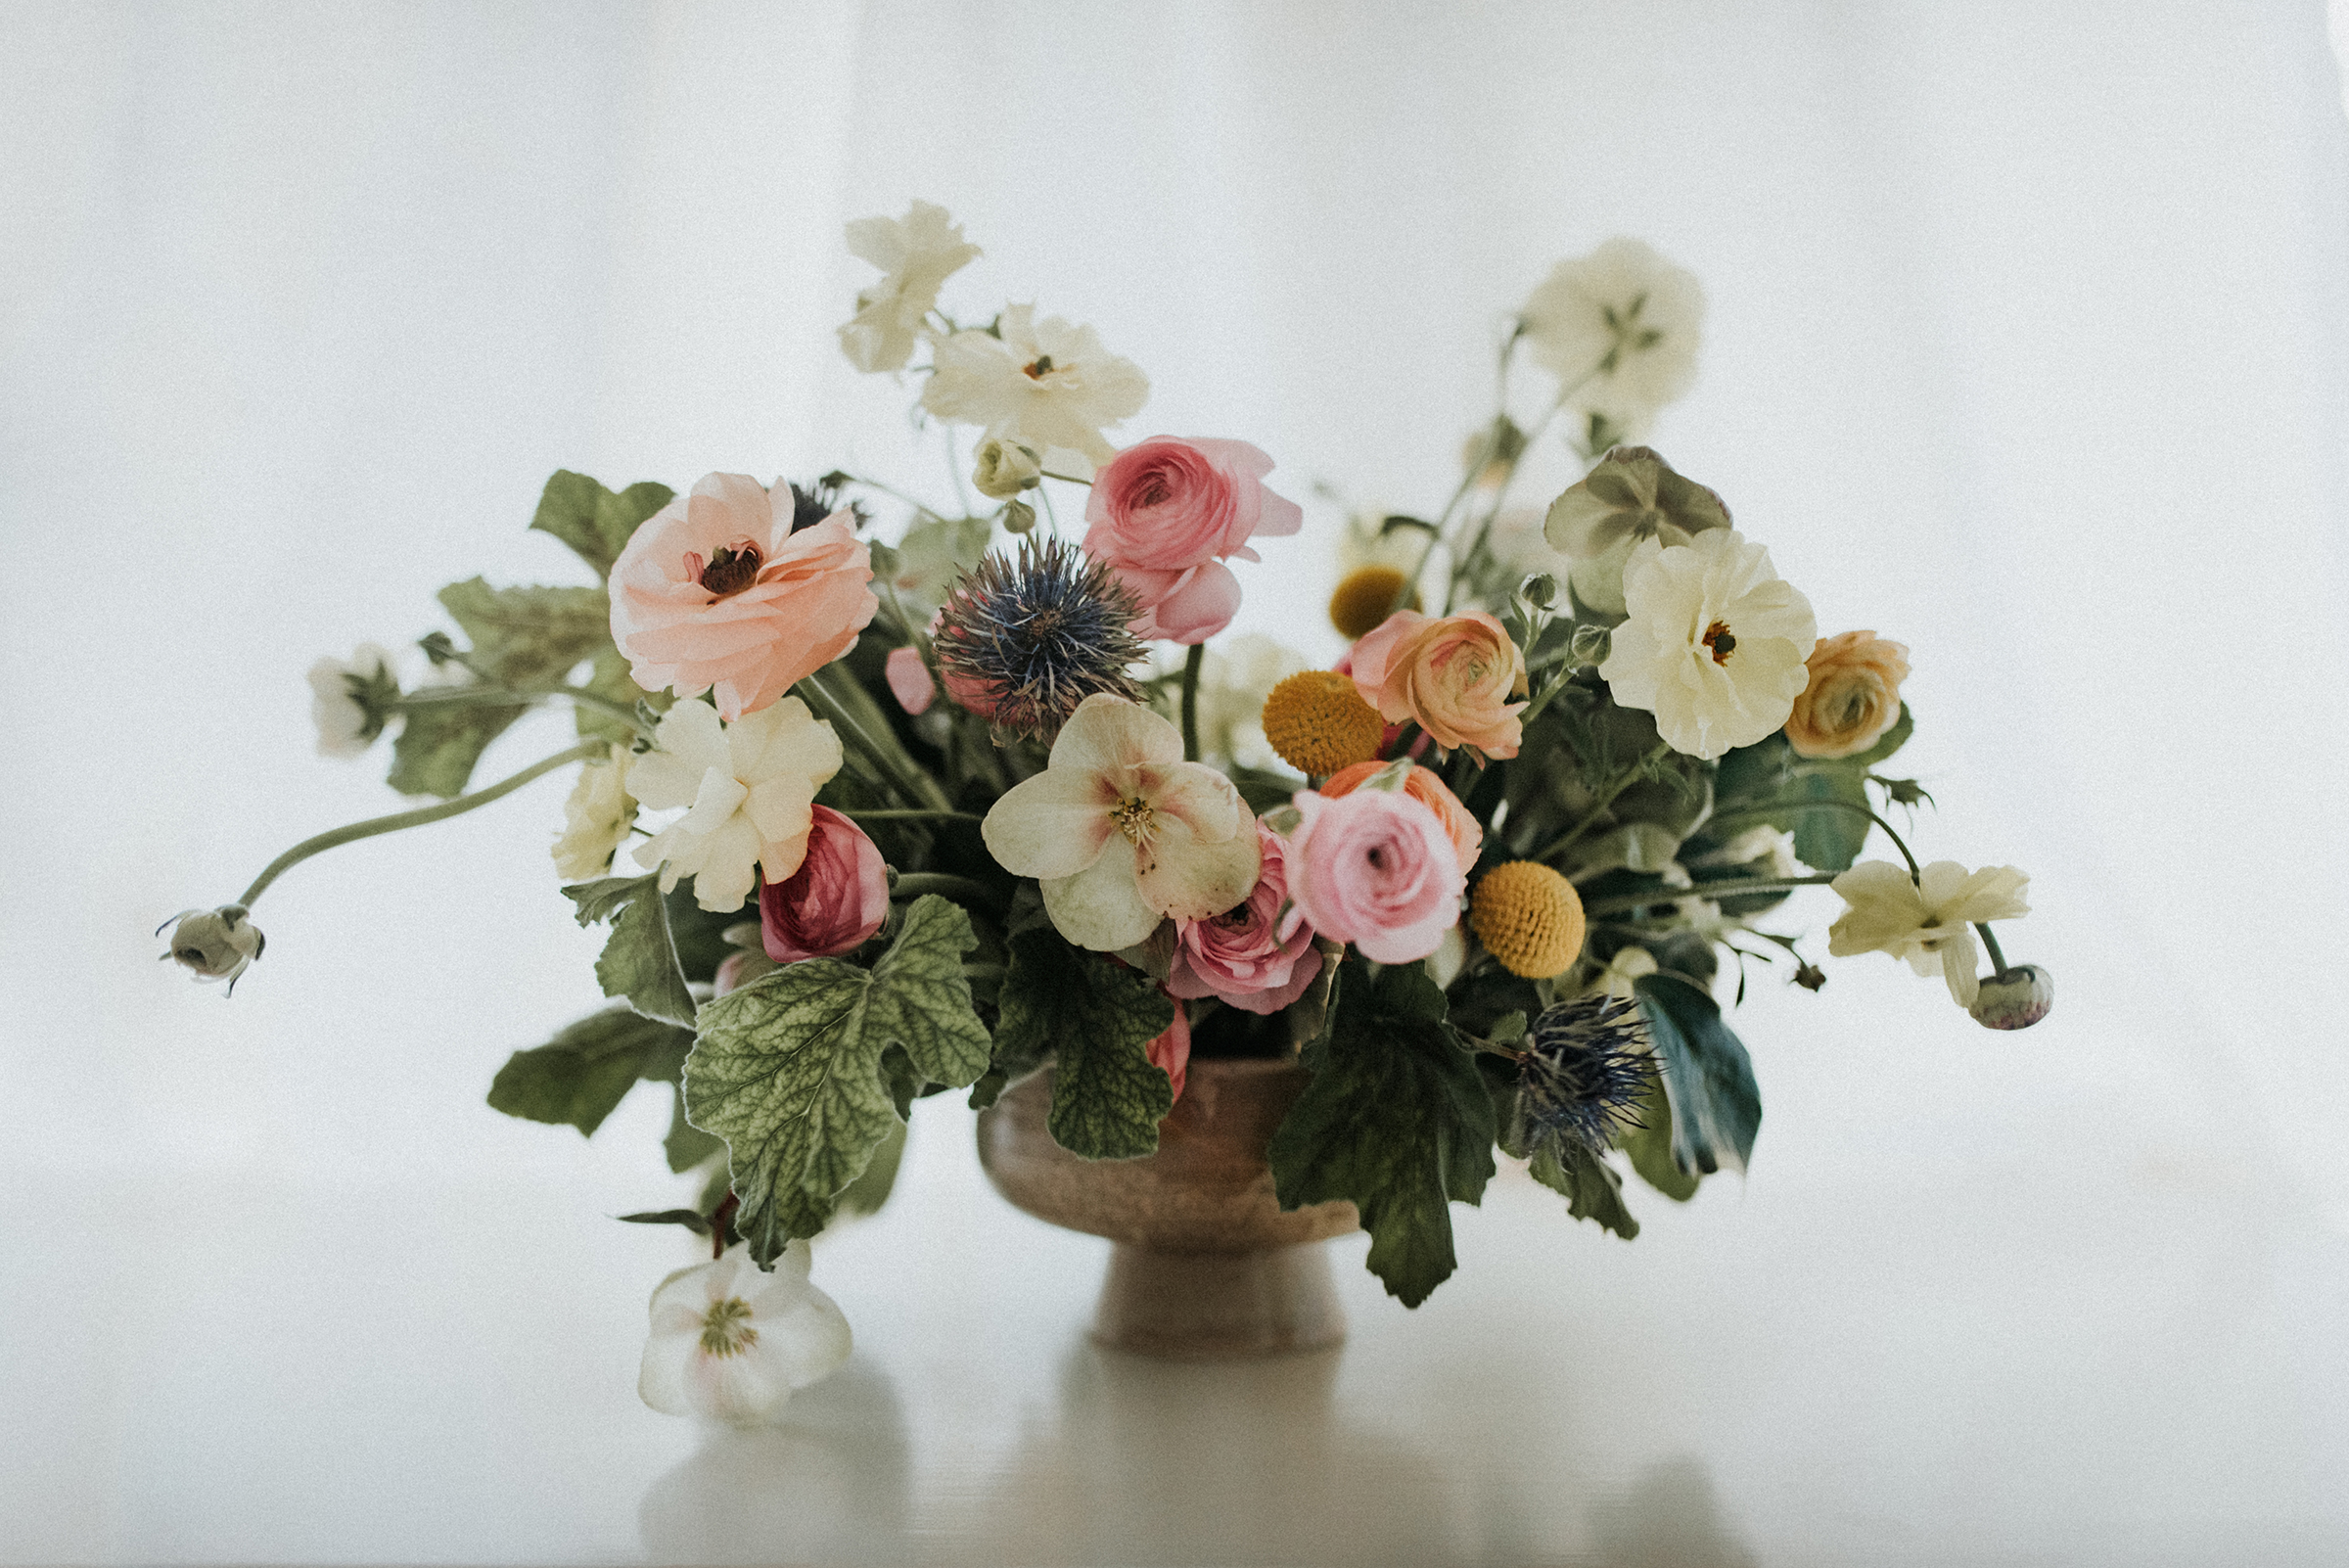 How to create beautiful spring flower arrangements